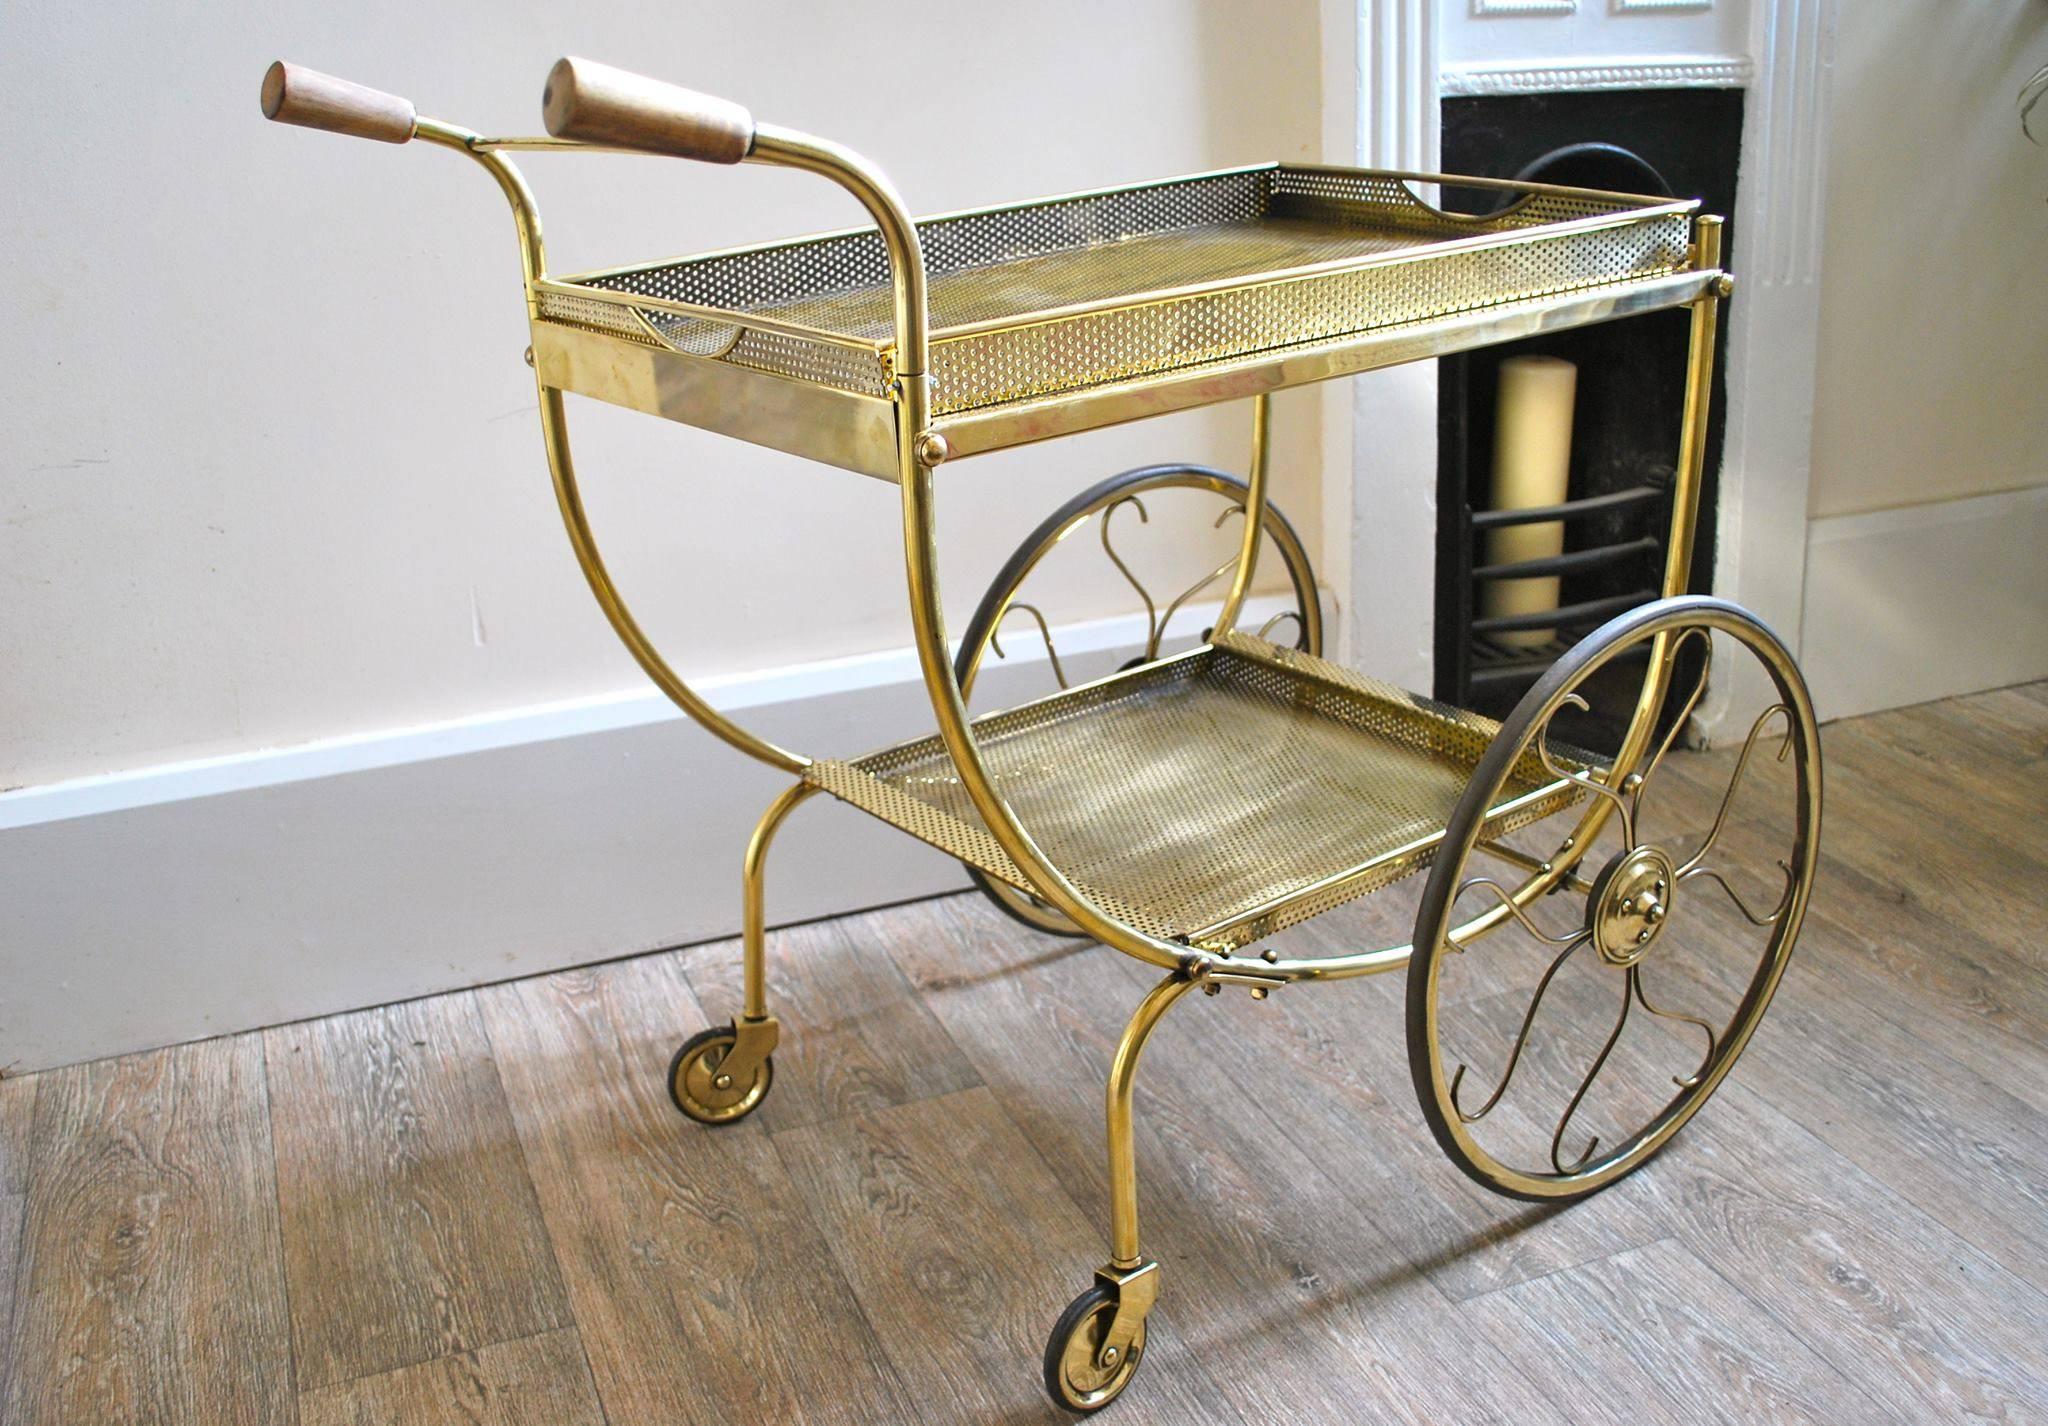 An elegant drinks trolley by Firma Scenka Tenn, Sweden. Original wooden handles and a curved body, two perforated removable brass trays. The exaggeretated front wheel with stylized spokes. Newly professionally polished brass gives luxurious looks.